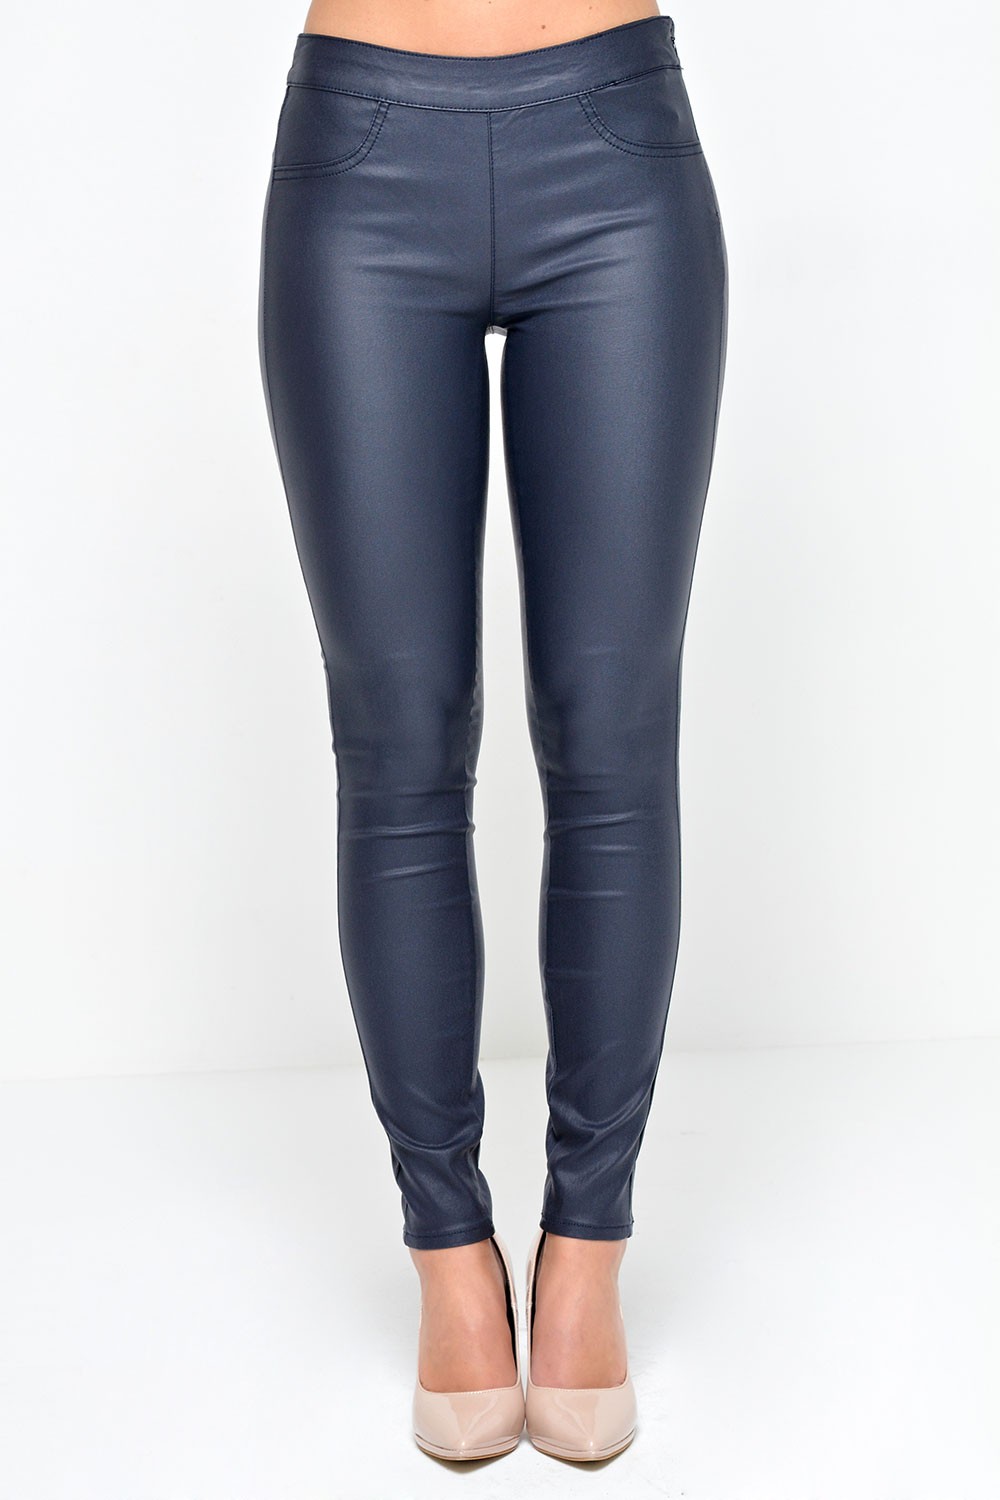 navy coated jeggings